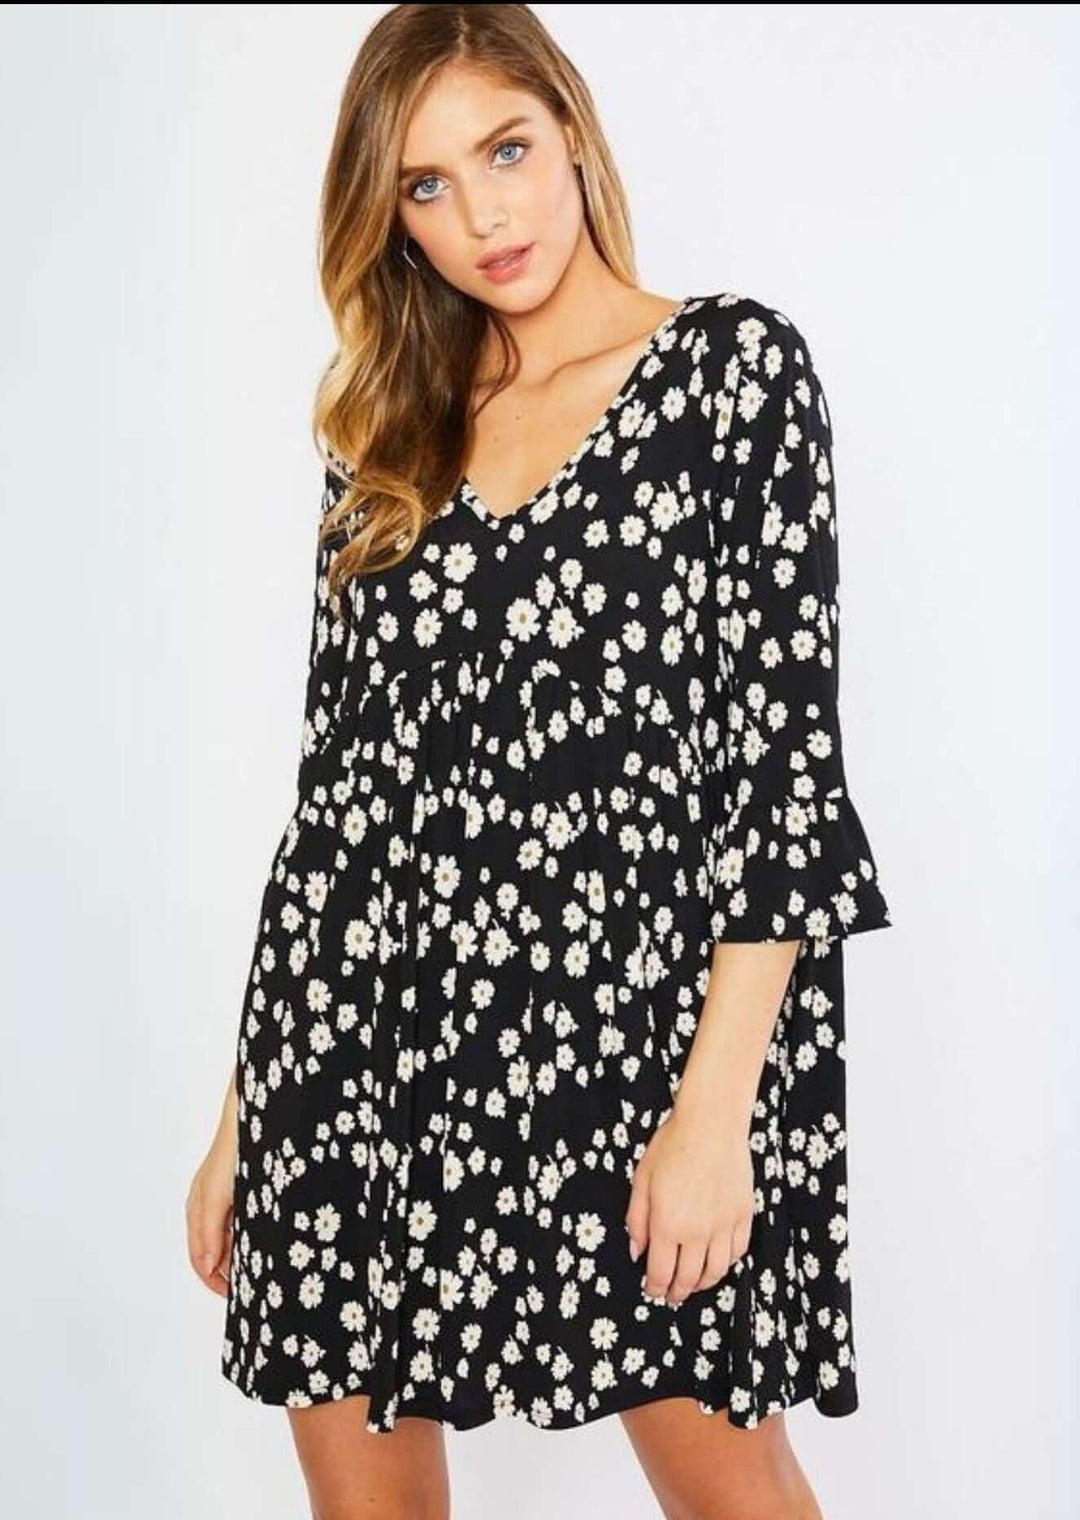 Women's Jersey Stretch Black Daisy Print V-Neck Baby Doll Cut Mini Dress | Made in USA | Classy Cozy Cool Women's Made in America Boutique